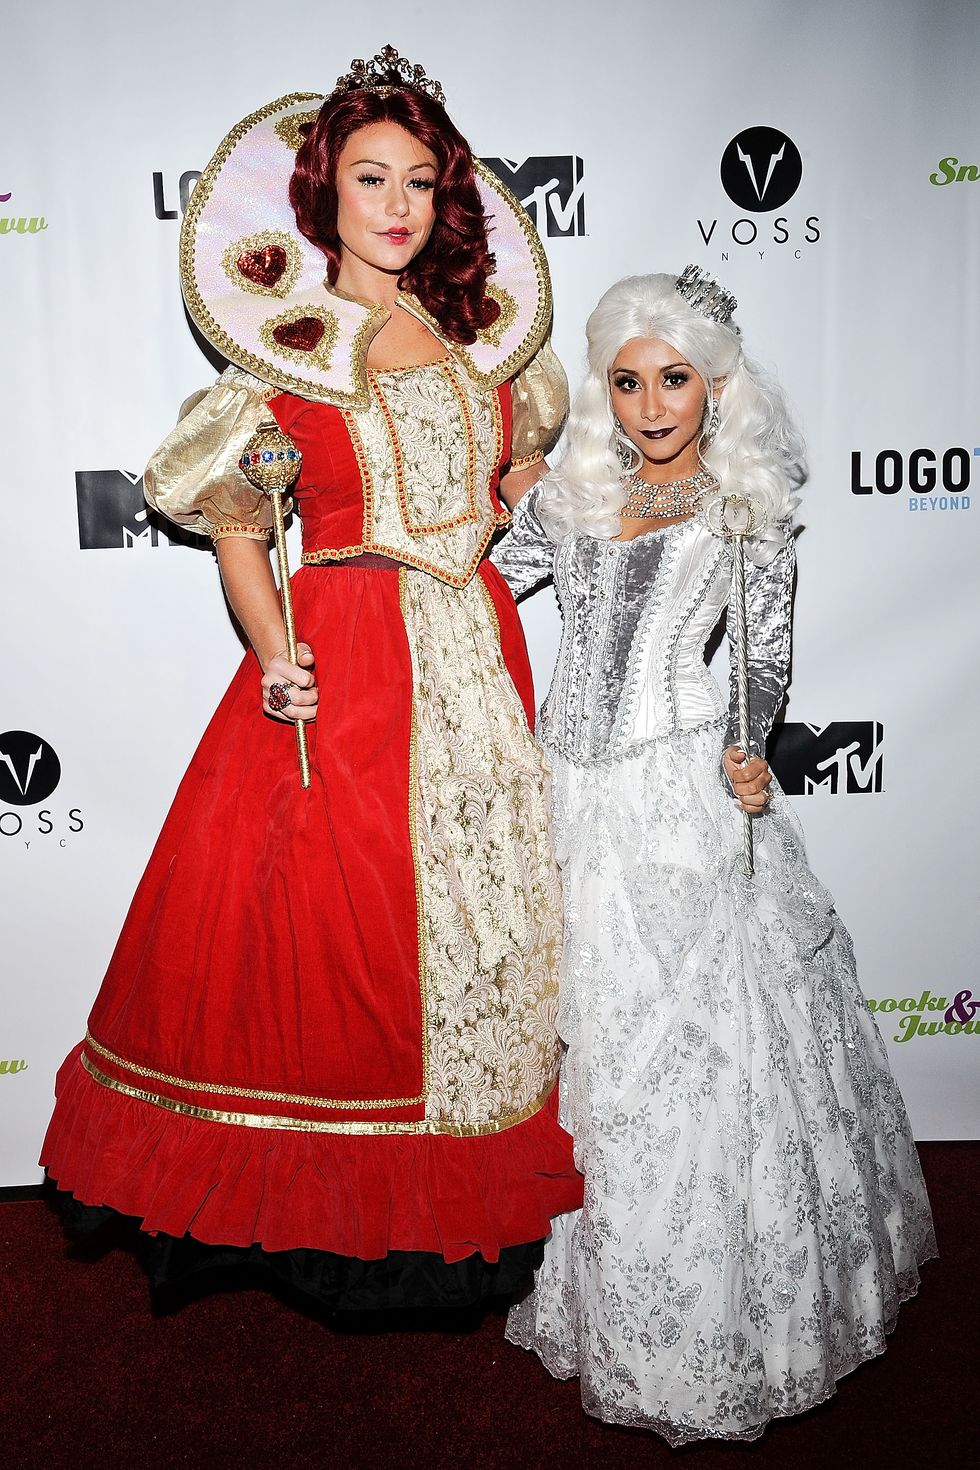 Let's Remember Snooki And JWOWW's 20 Most Outrageous Outfits, Shall We?